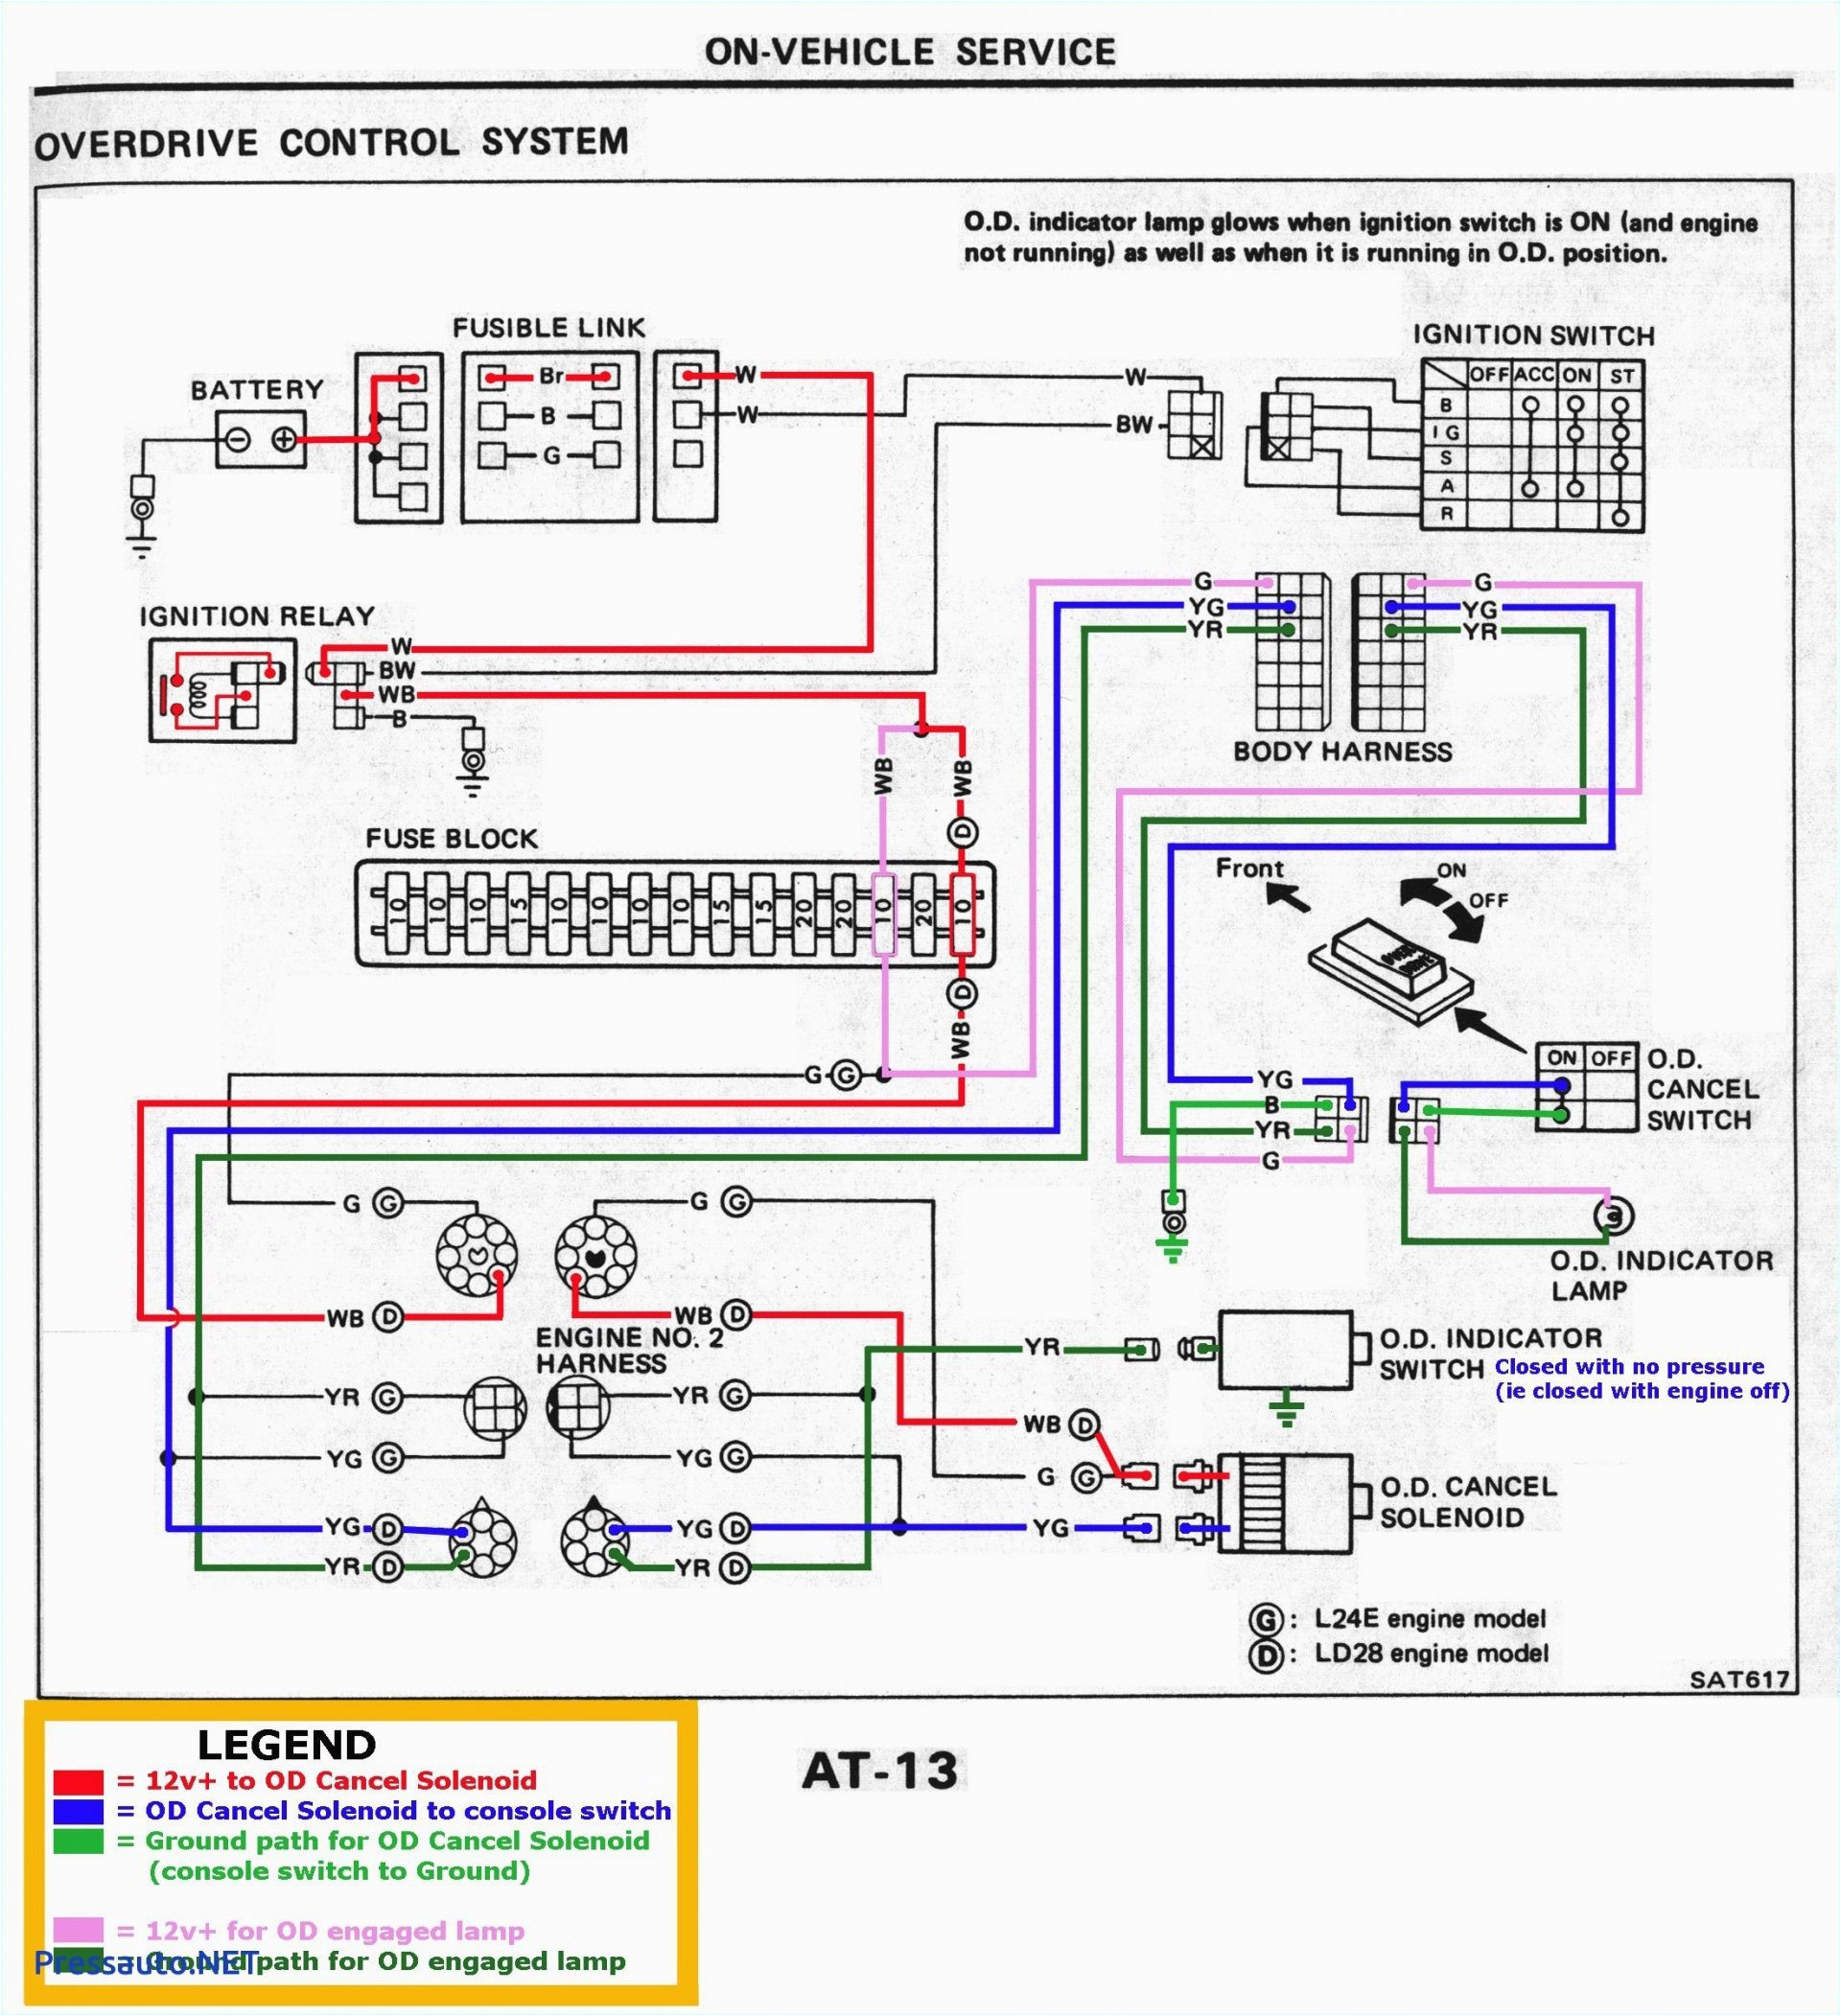 semi trailer wiring harness diagram lzk gallery wiring diagram 1967 mustang ignition switch wiring lzk gallery